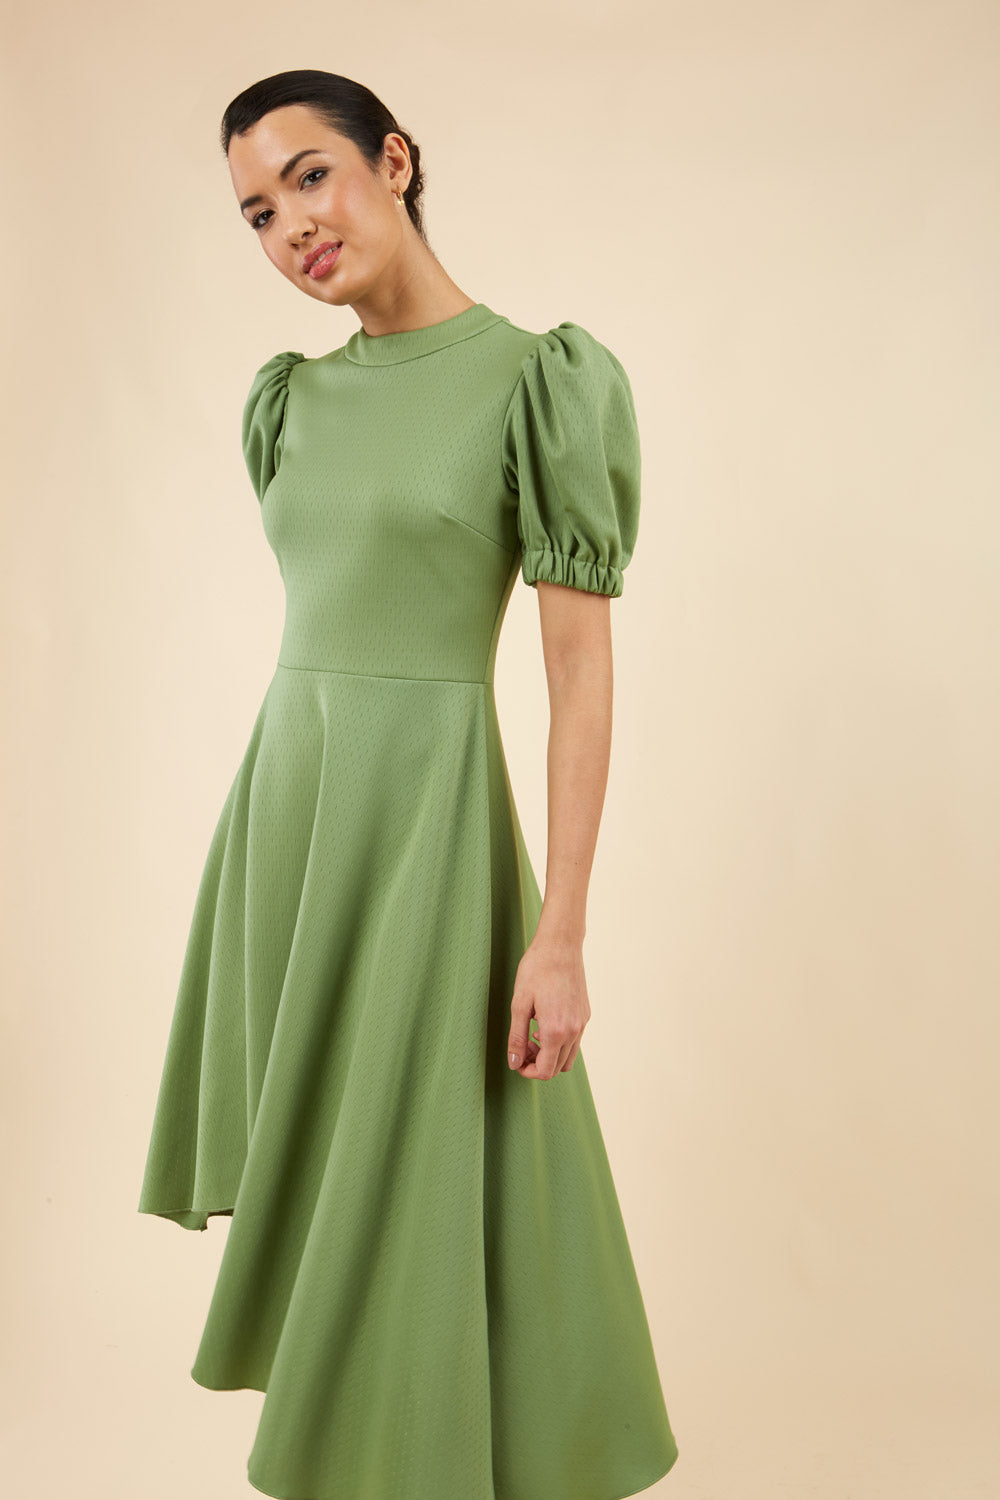 brunette model wearing diva catwalk ola swing dress with puffed oversized sleeves and asymmetric swing skirt with rounded high neck in green front